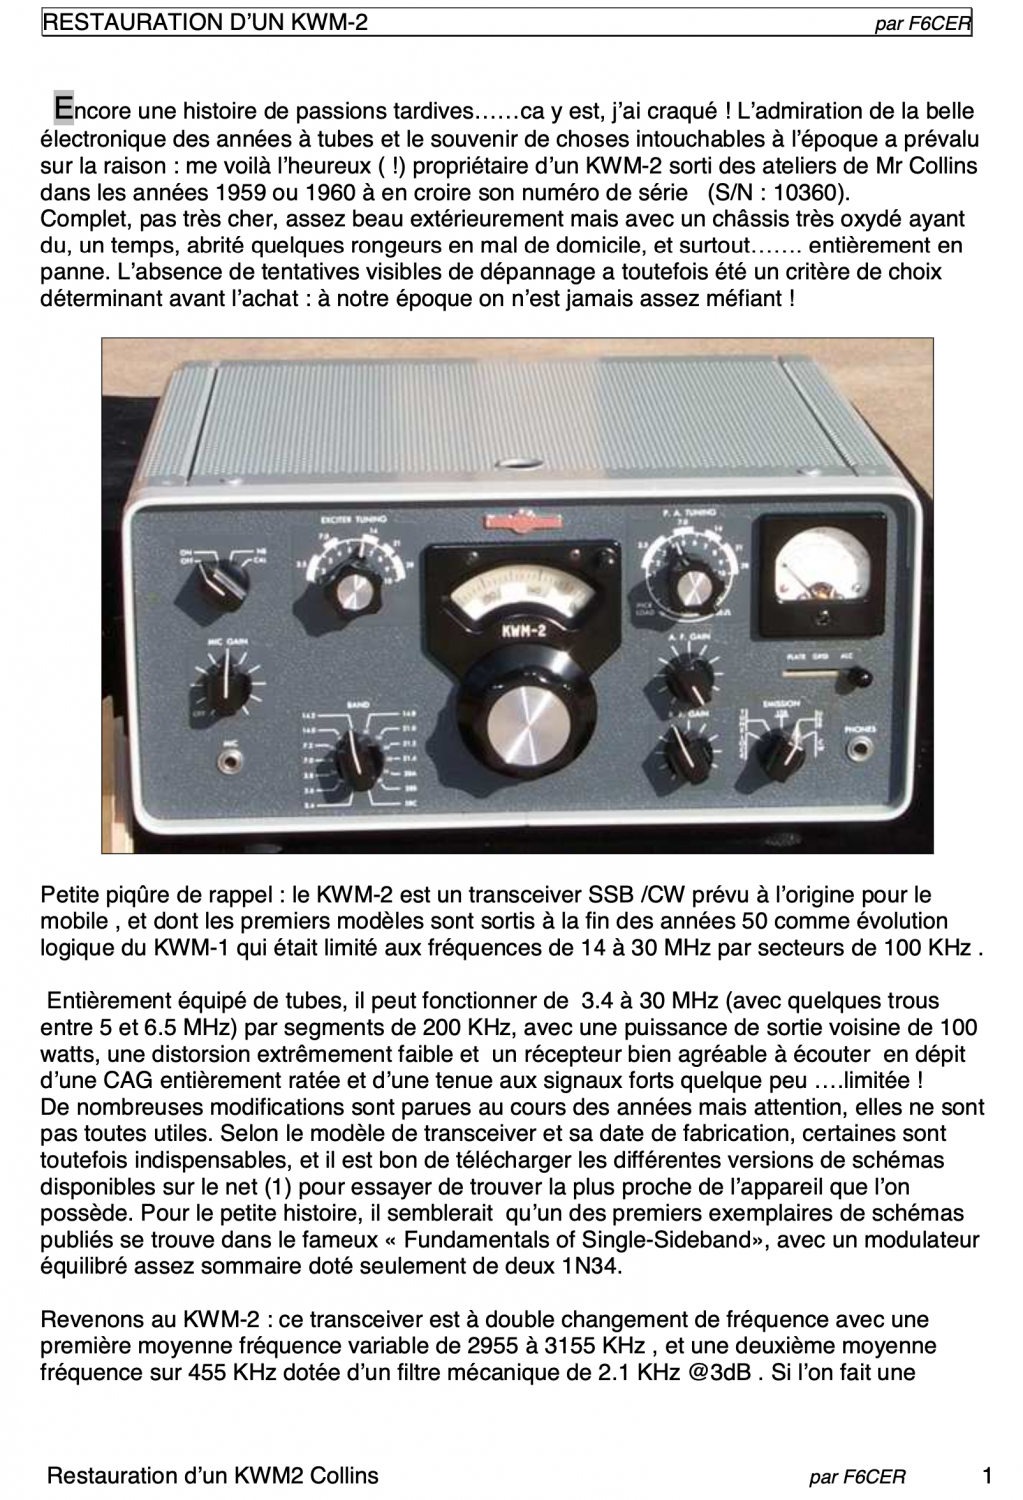 Collins KWM-2 Transceiver - Restoration Notes by G. Ricaud F6CER (French)